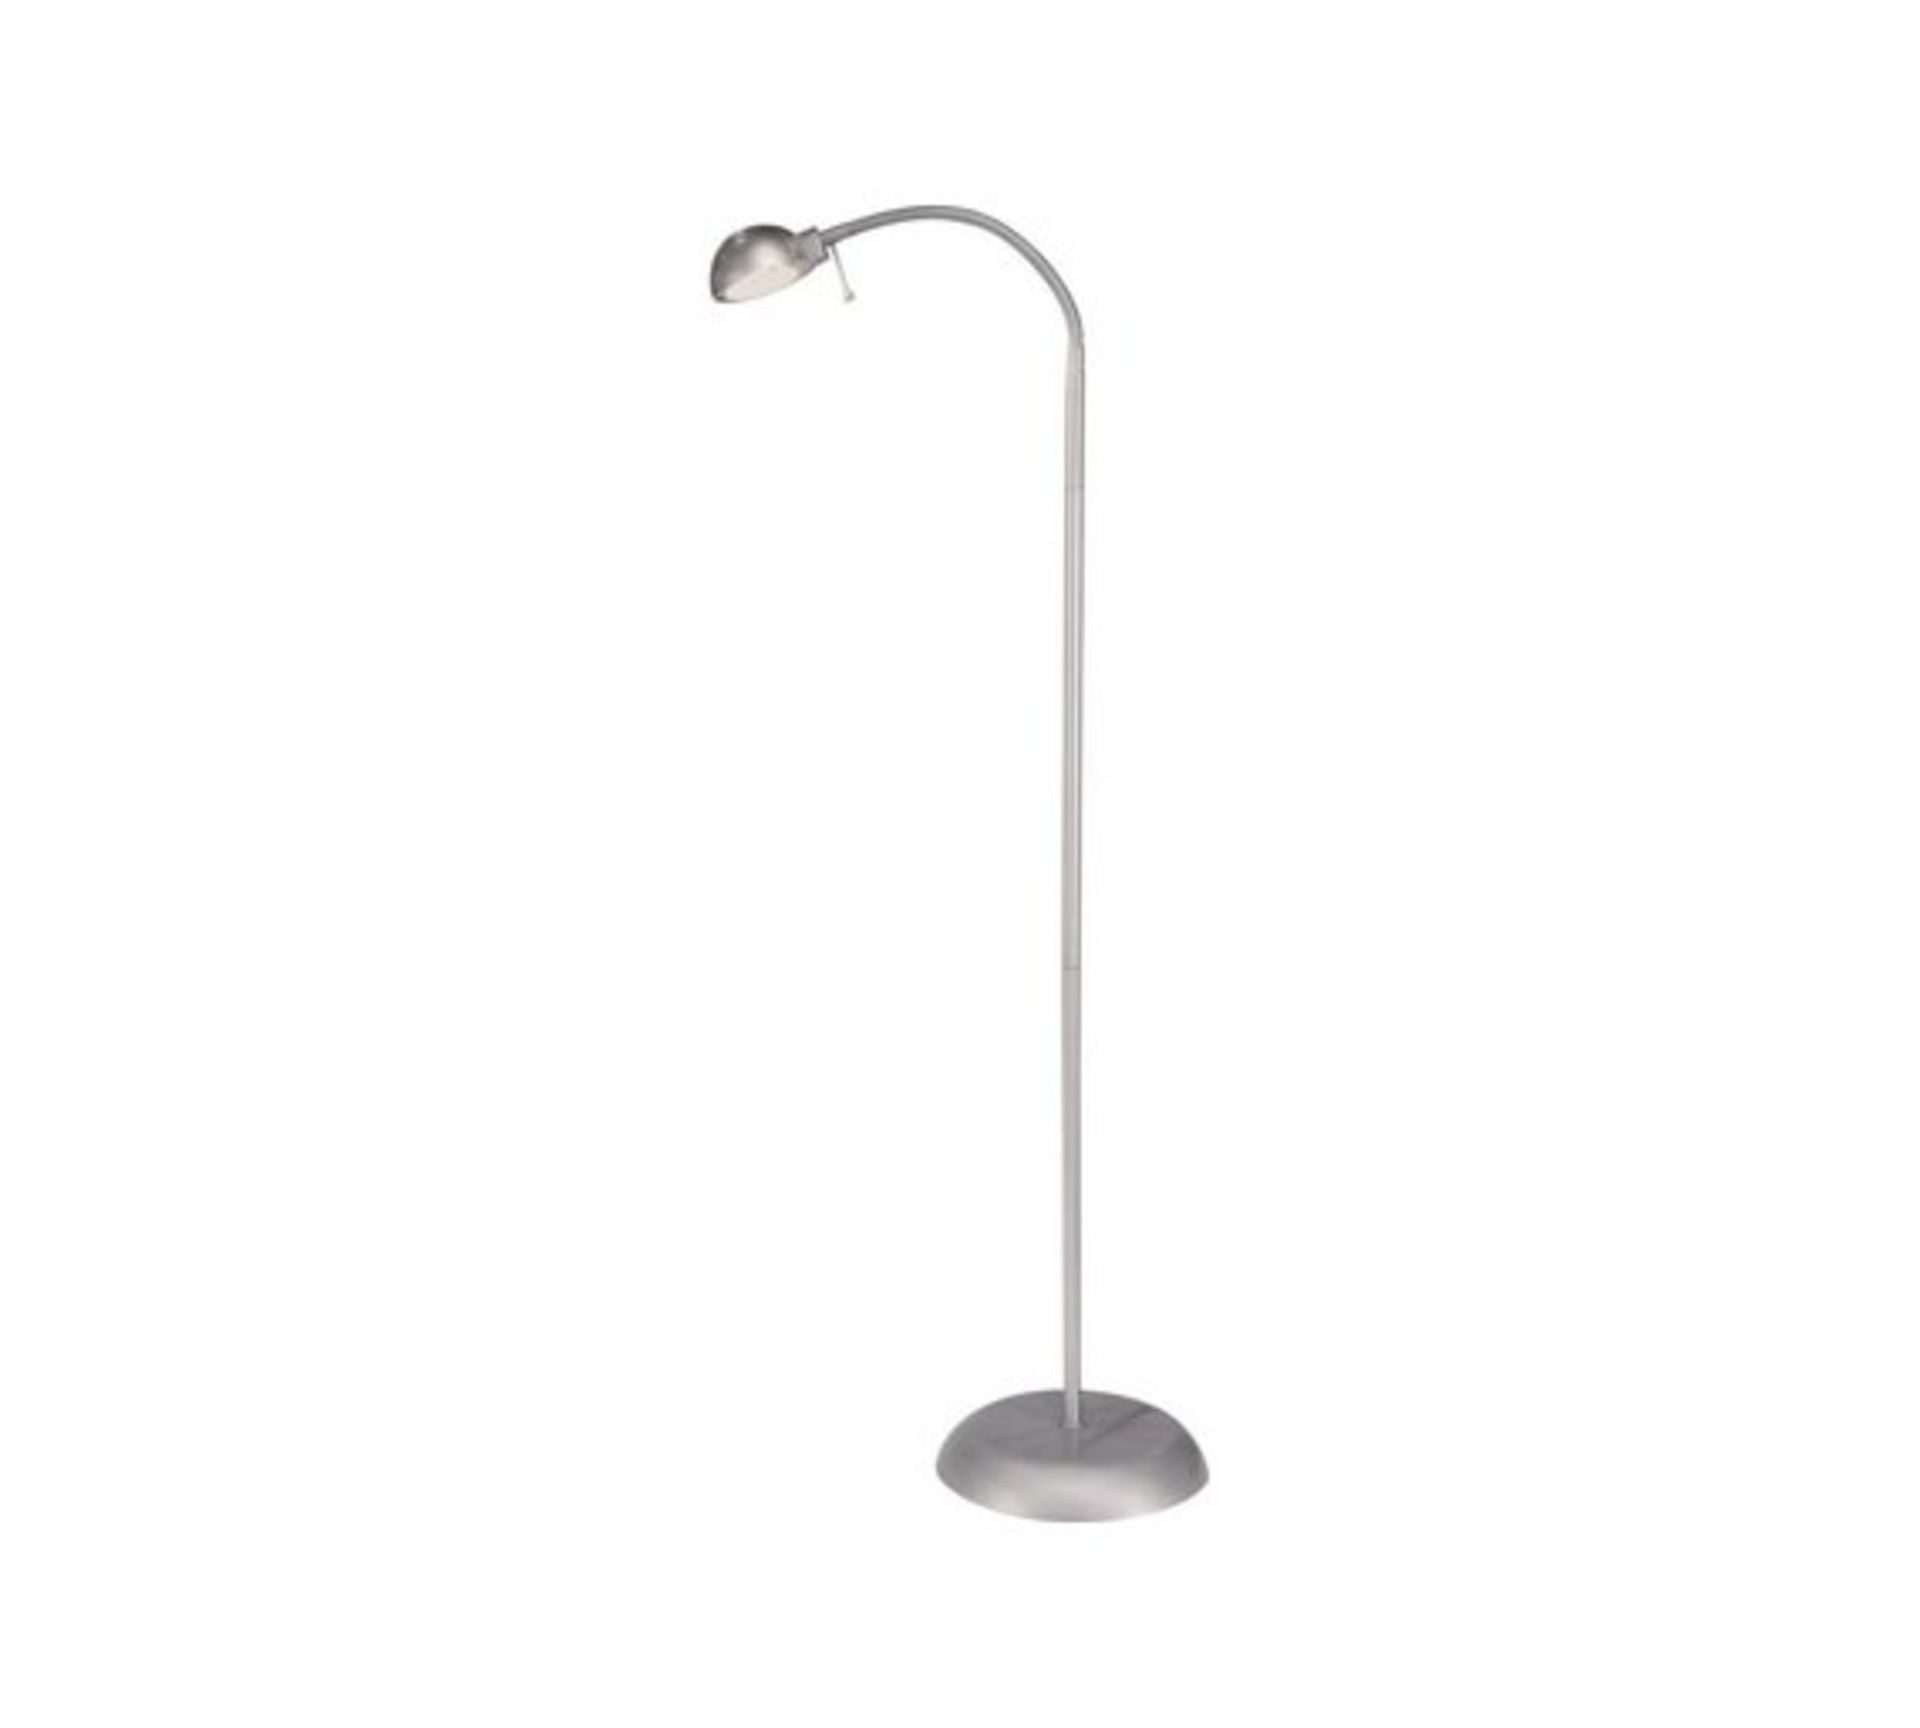 1 BOXED CHECKED AND REFURBISHED ARGOS READING COLLECTION FLOOR LAMP IN SILVER (NO VAT)